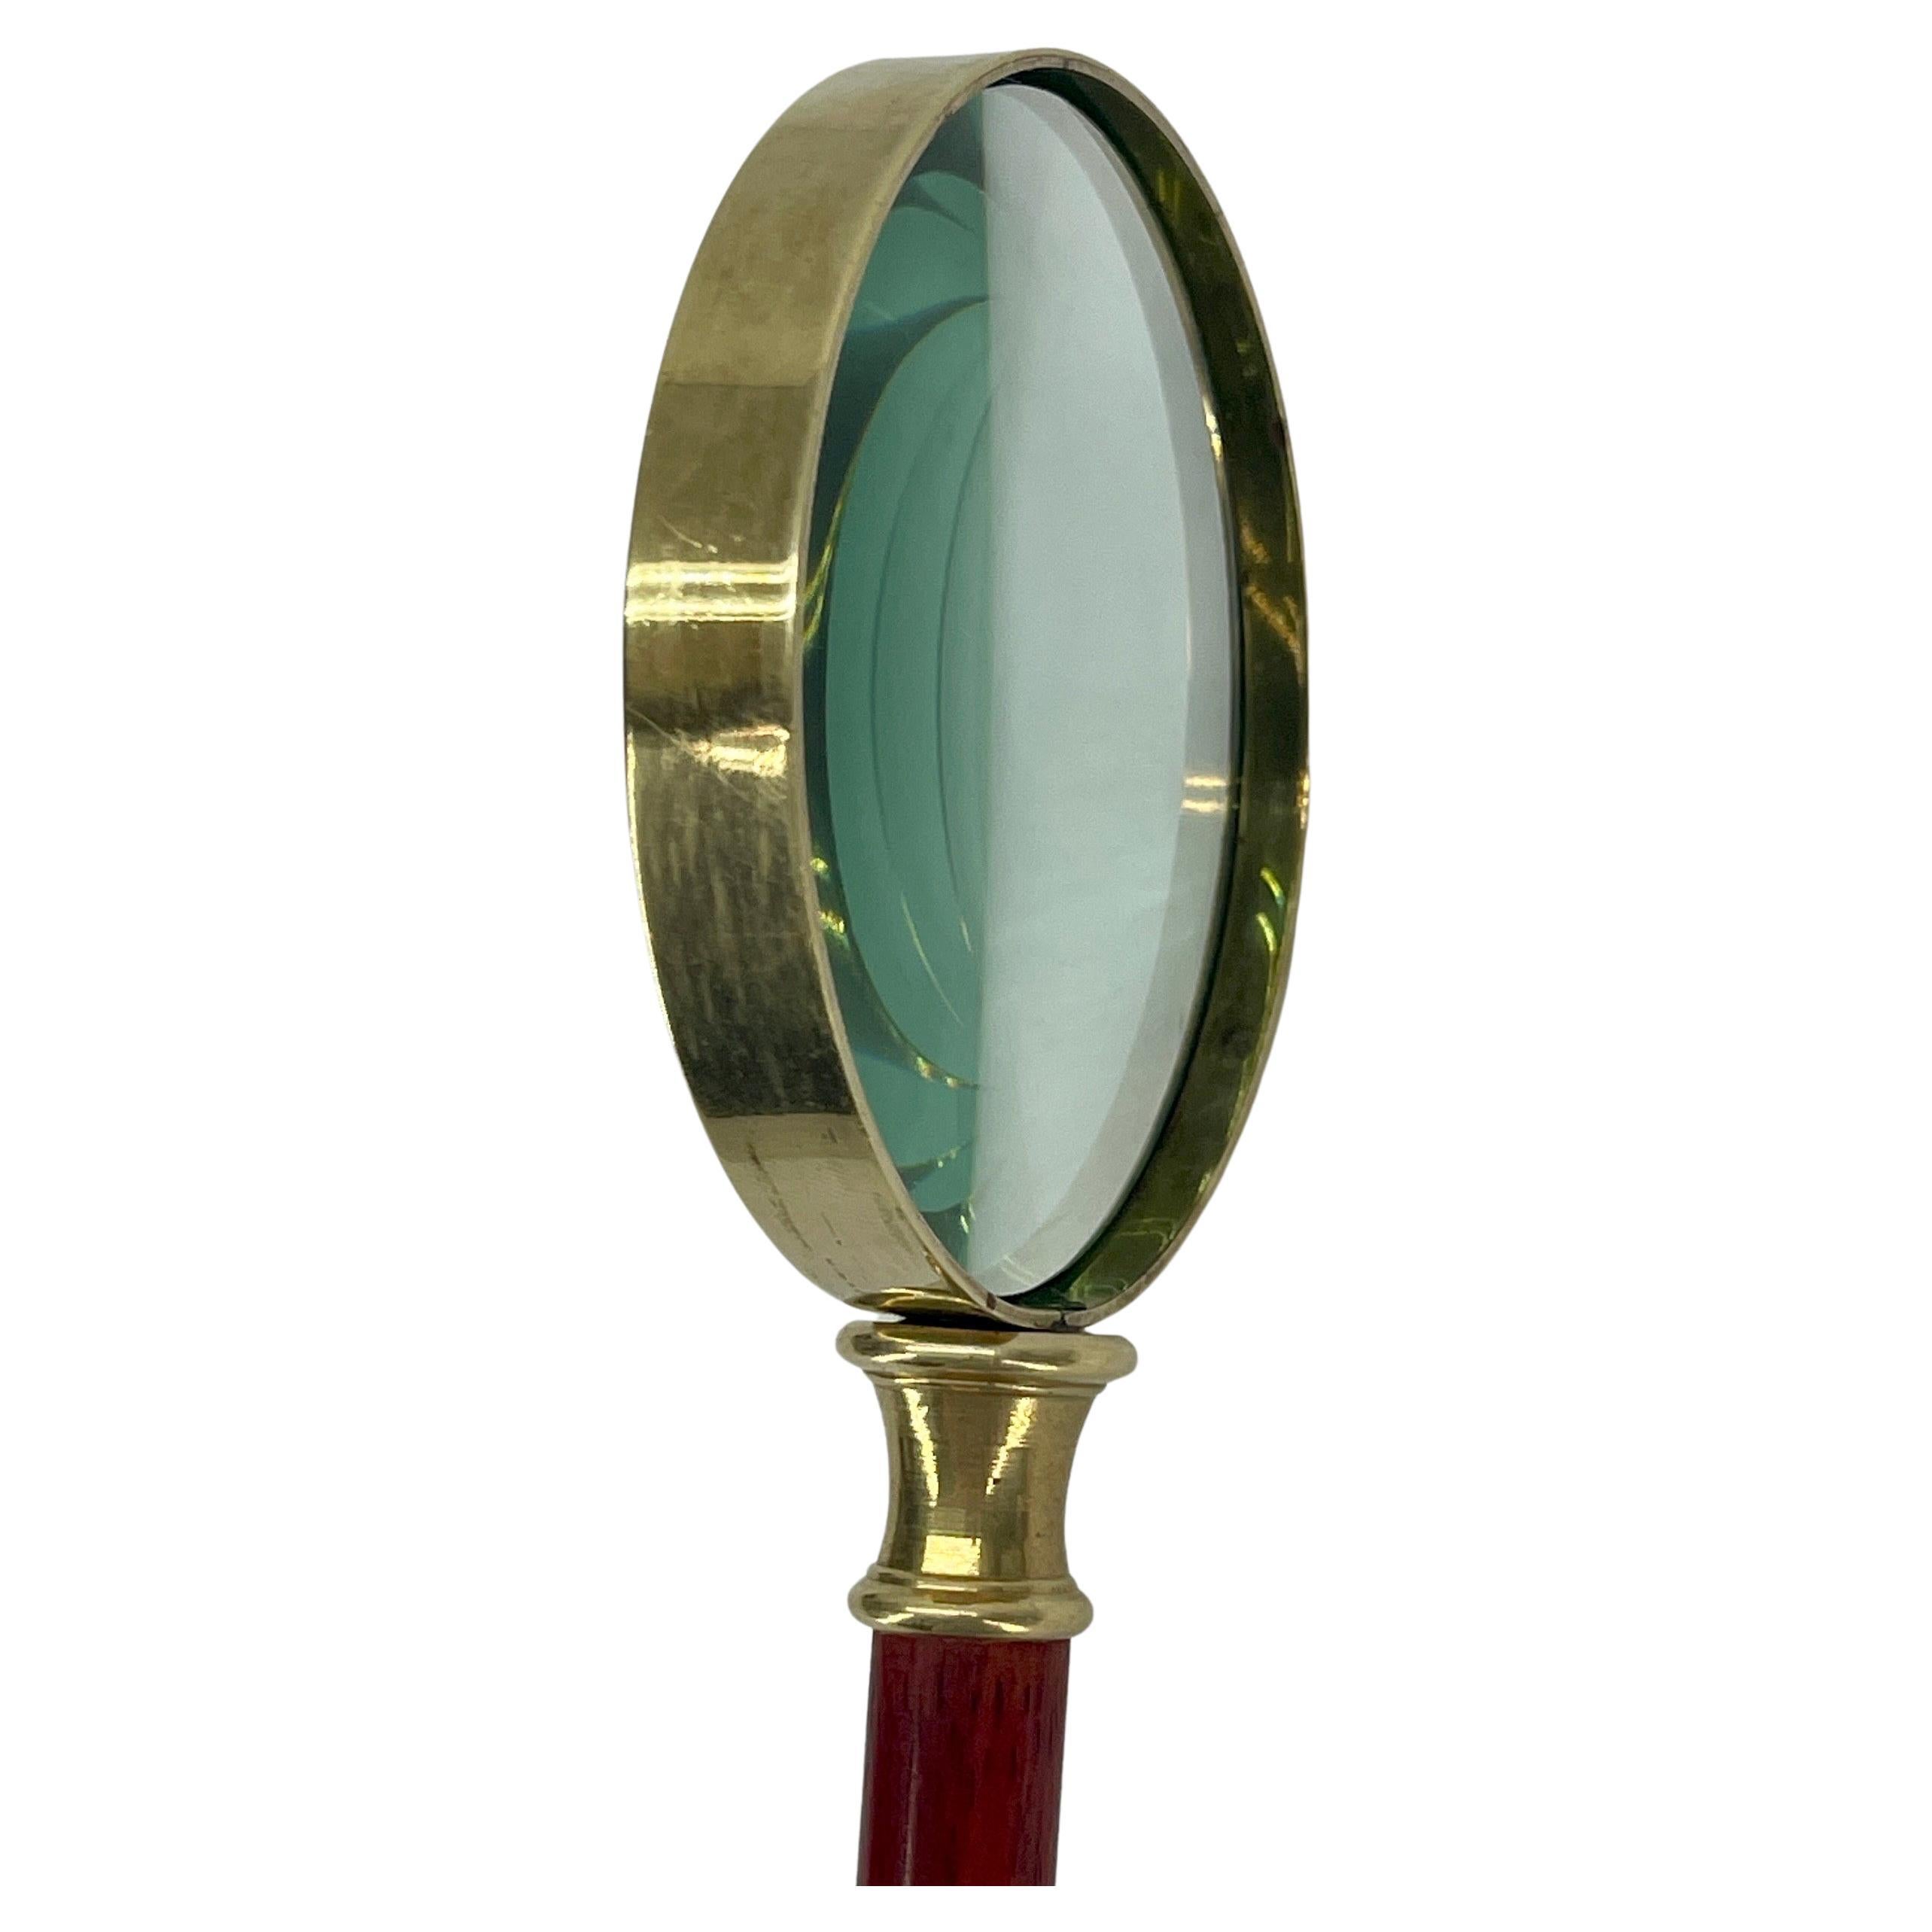 Classic vintage brass and cherrywood magnifying glass.